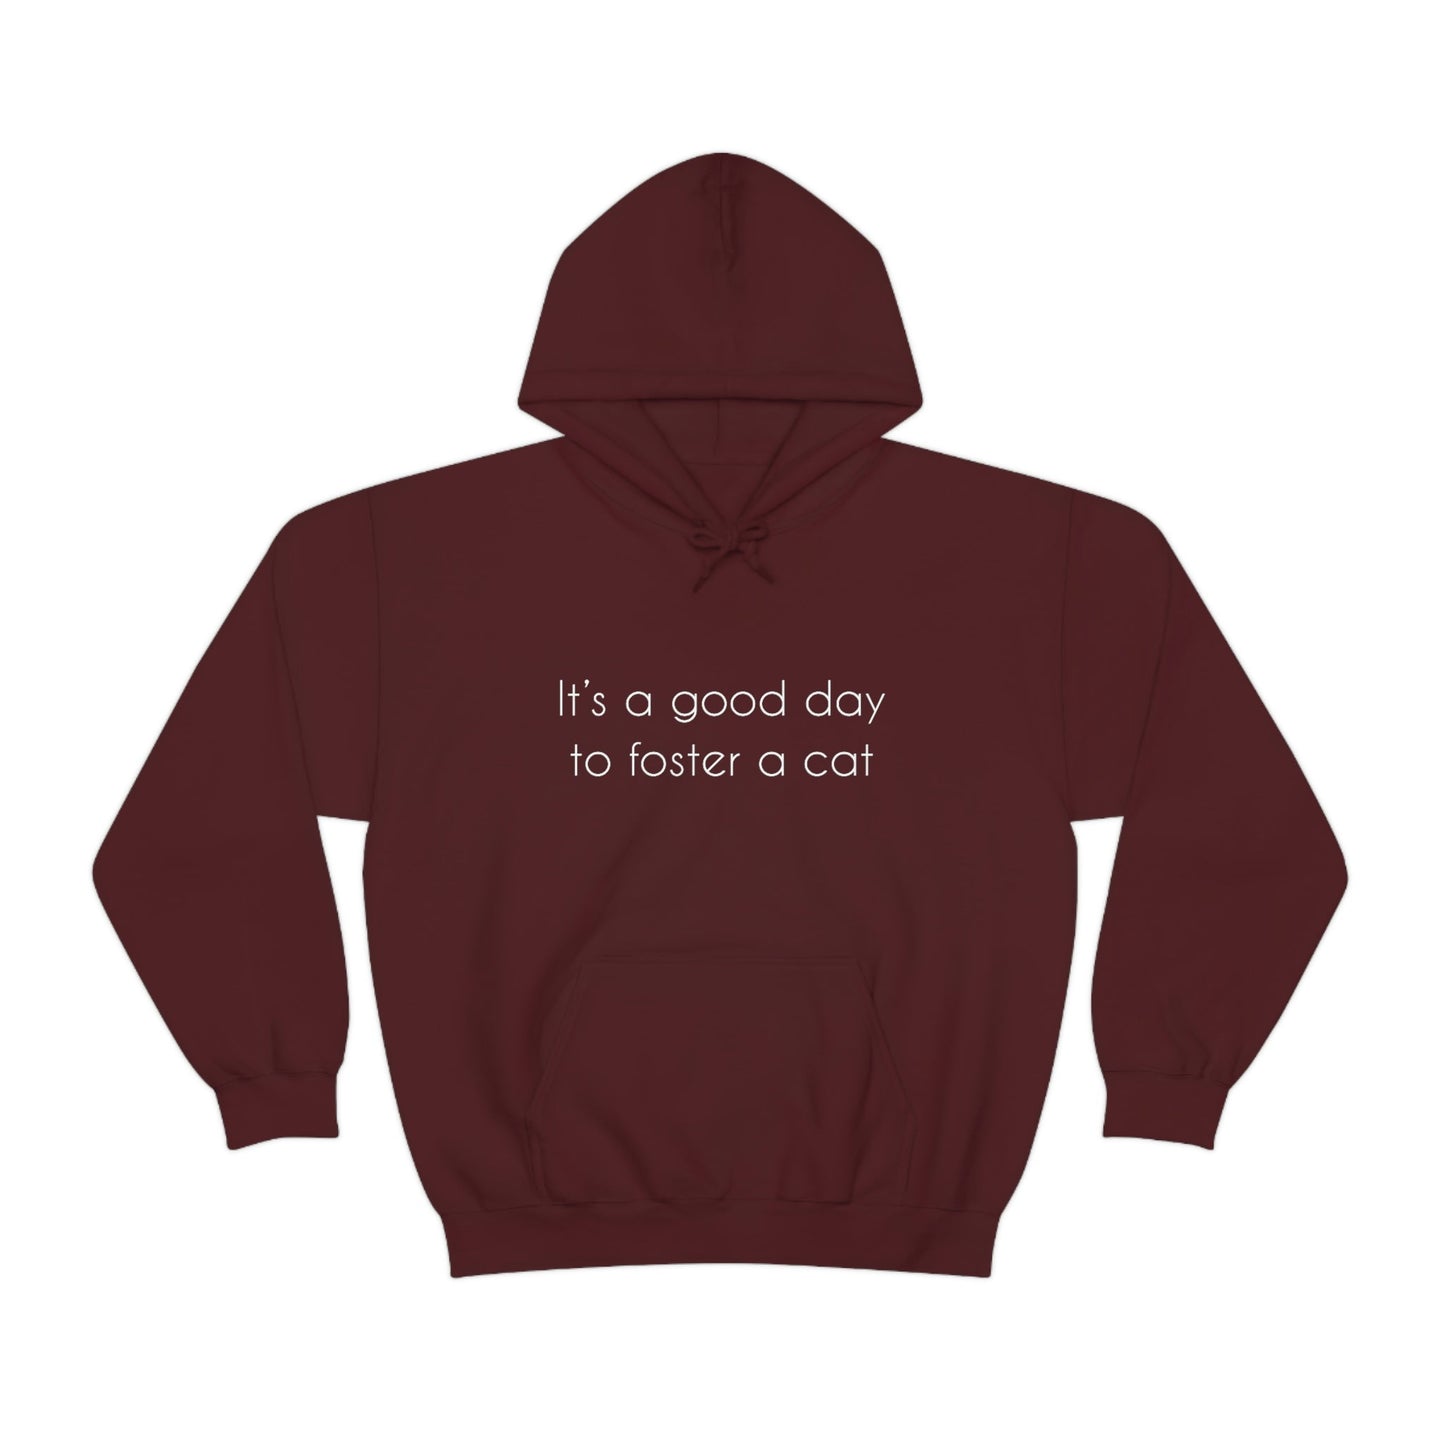 It's A Good Day To Foster A Cat | Hooded Sweatshirt - Detezi Designs-22301581913386453851